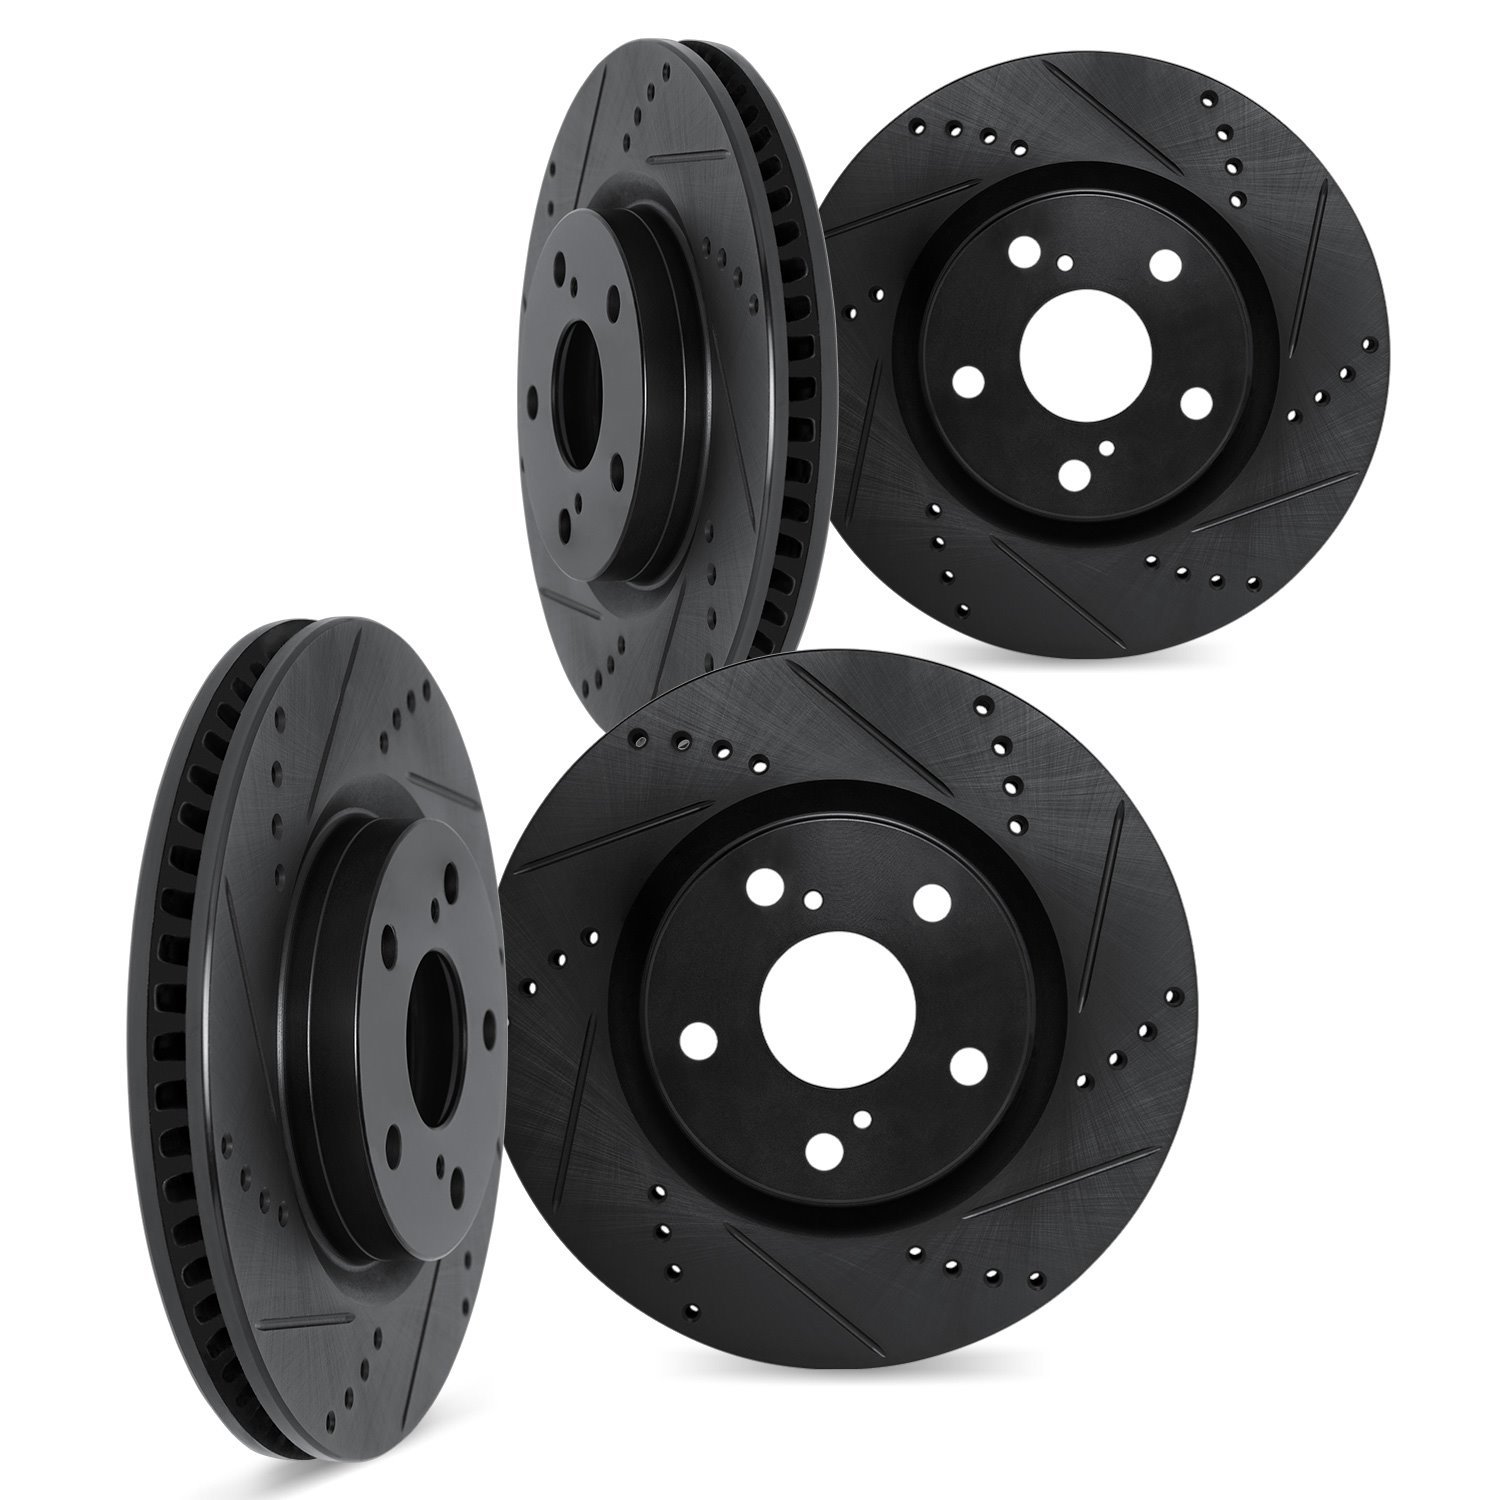 8004-67135 Drilled/Slotted Brake Rotors [Black], 2002-2007 Infiniti/Nissan, Position: Front and Rear